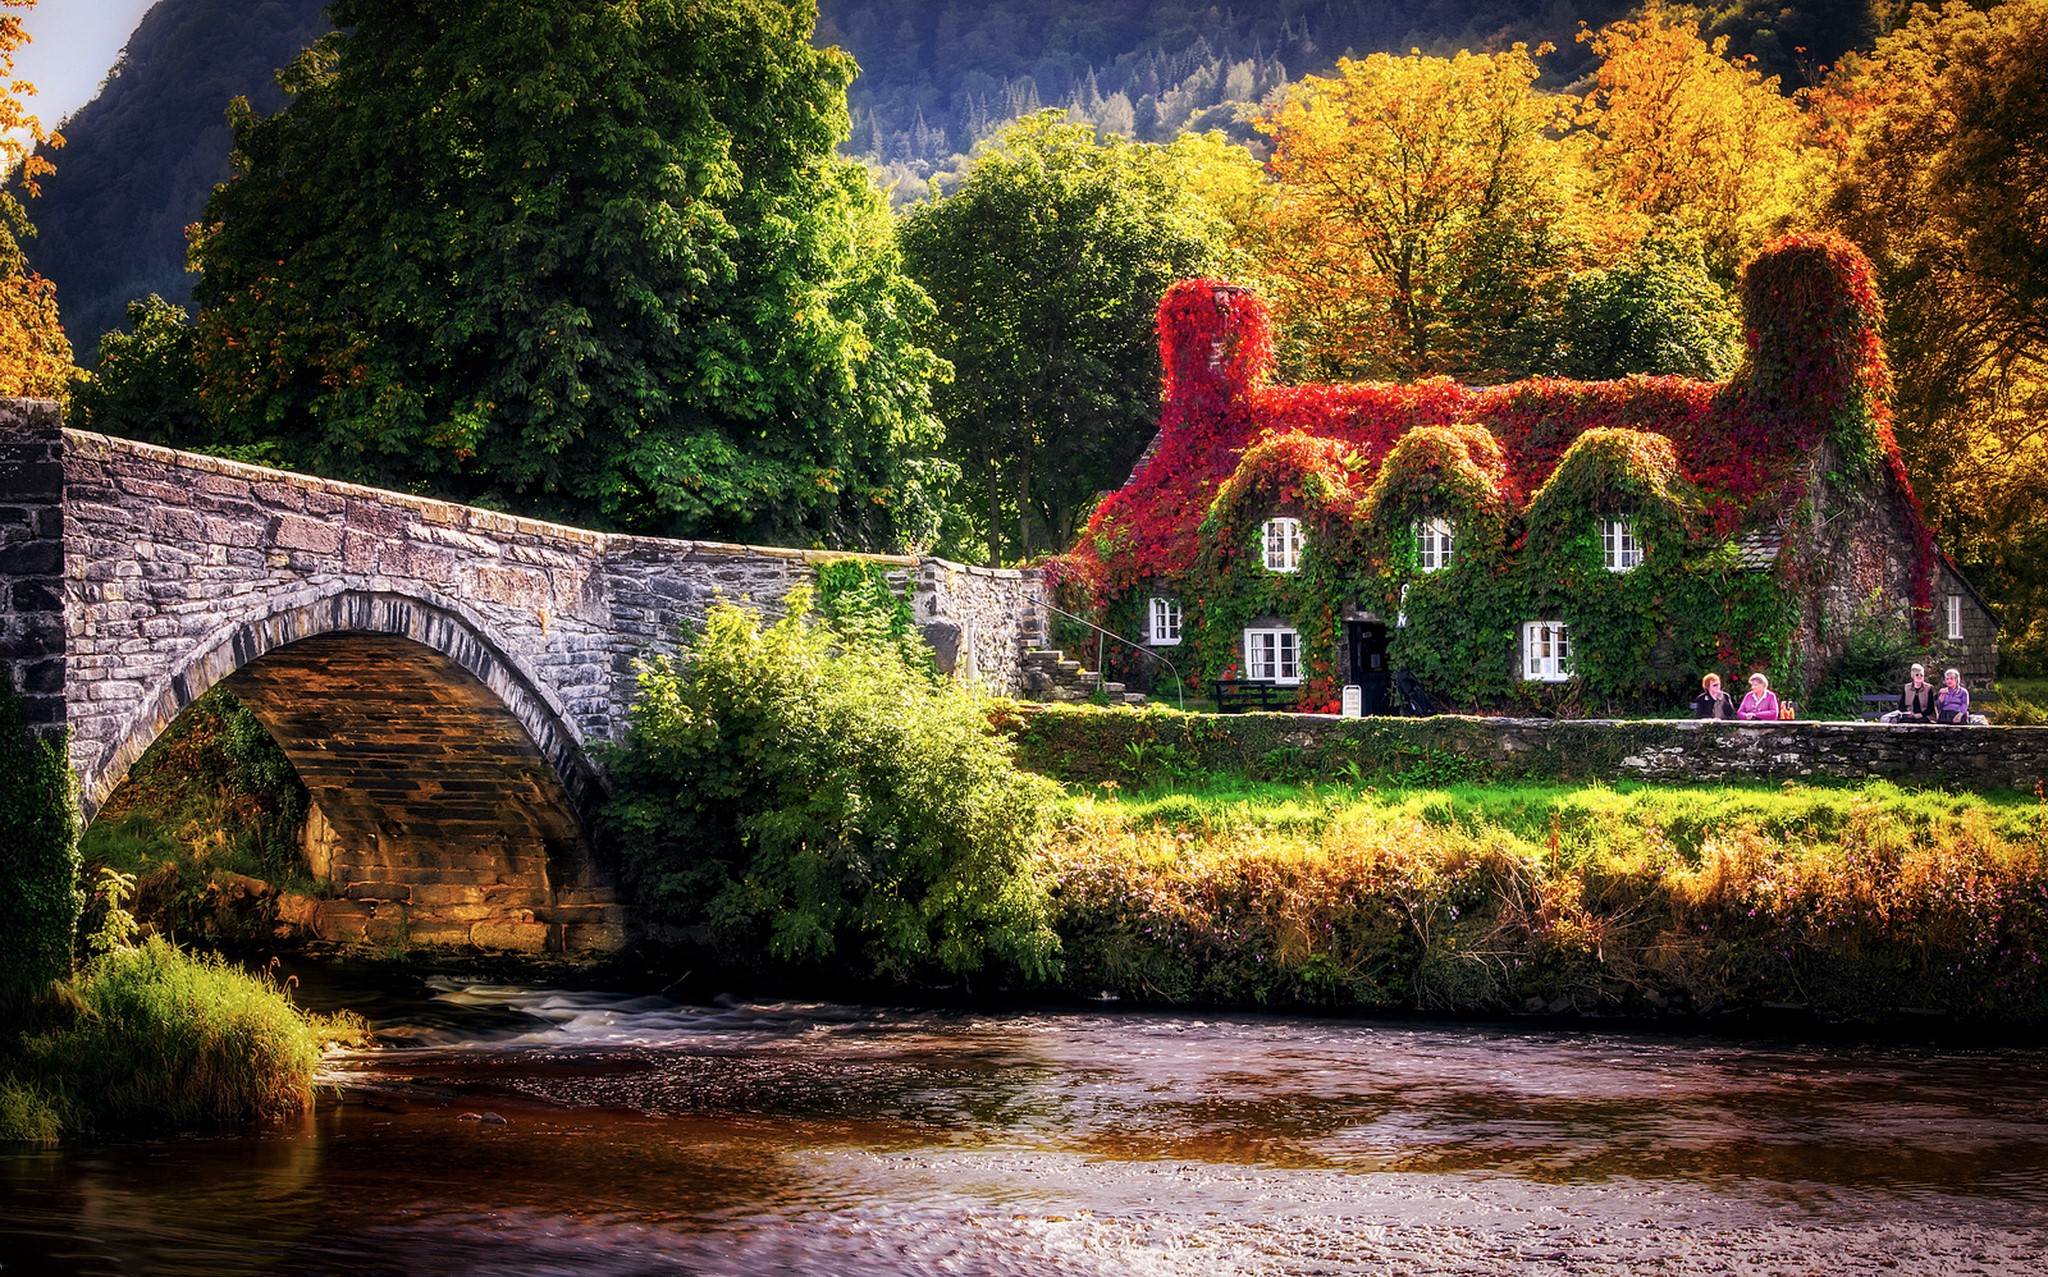 man made, house, bridge, fall, ivy, river, wales for Windows